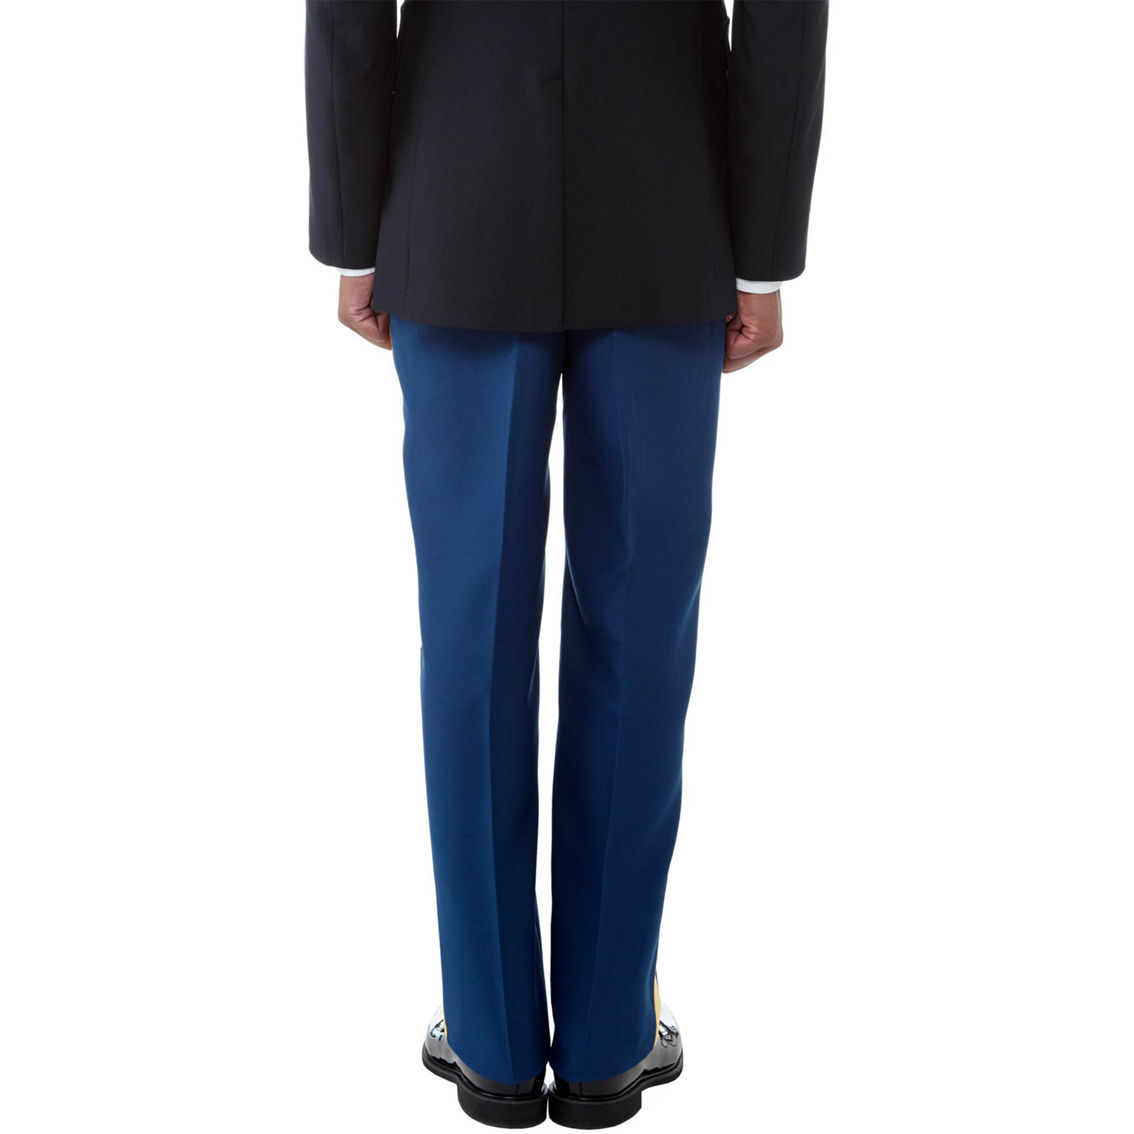 Army Senior NCO and Officer Trousers with Gold Braid AB 451 (ASU) - Image 2 of 4